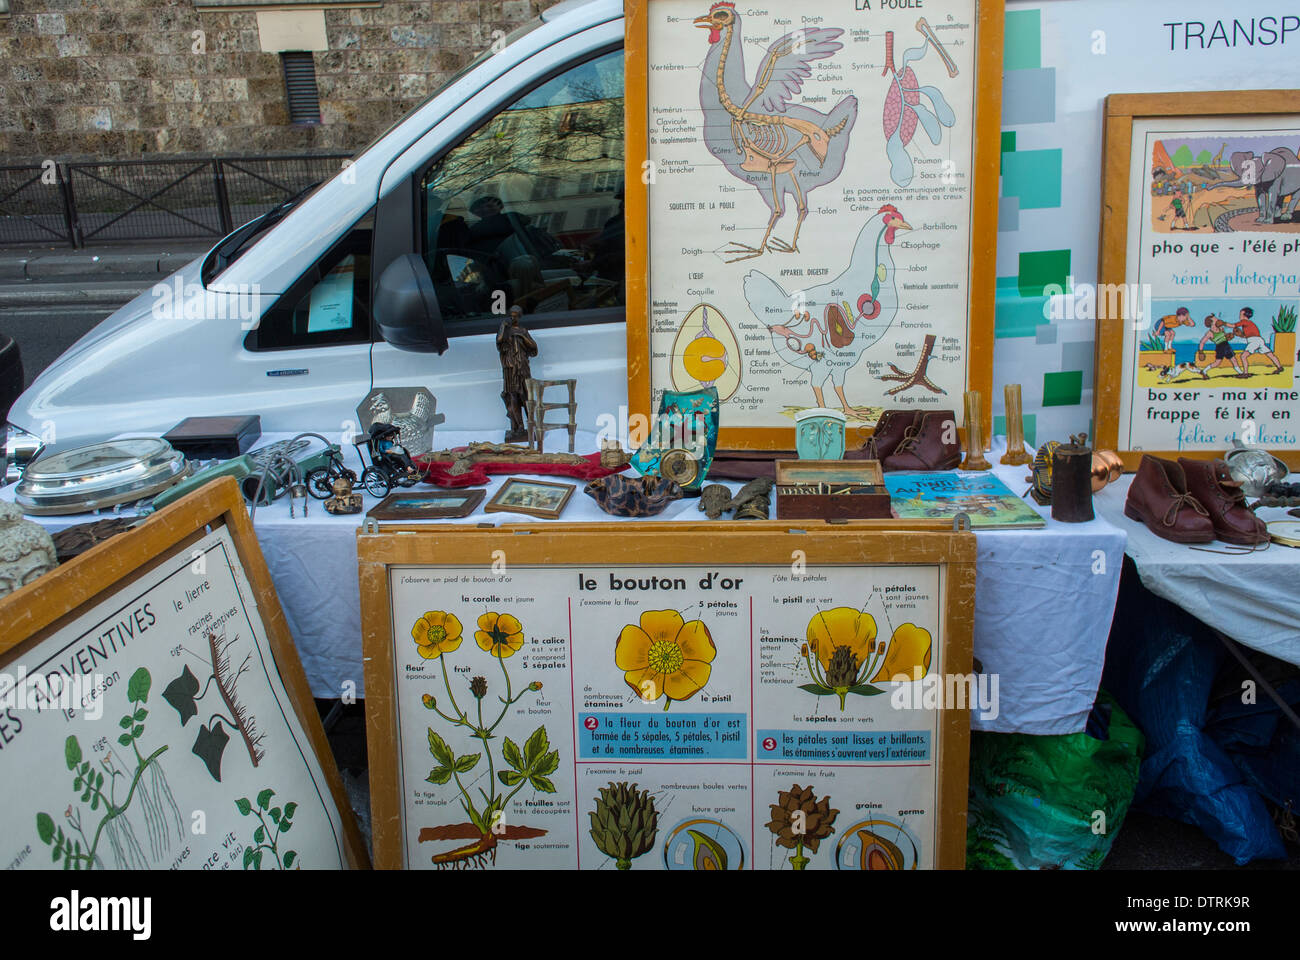 Paris, France, Used Object on Table, Shopping on Street, French Flea  Markets in Belleville District, Old Frames Stock Photo - Alamy